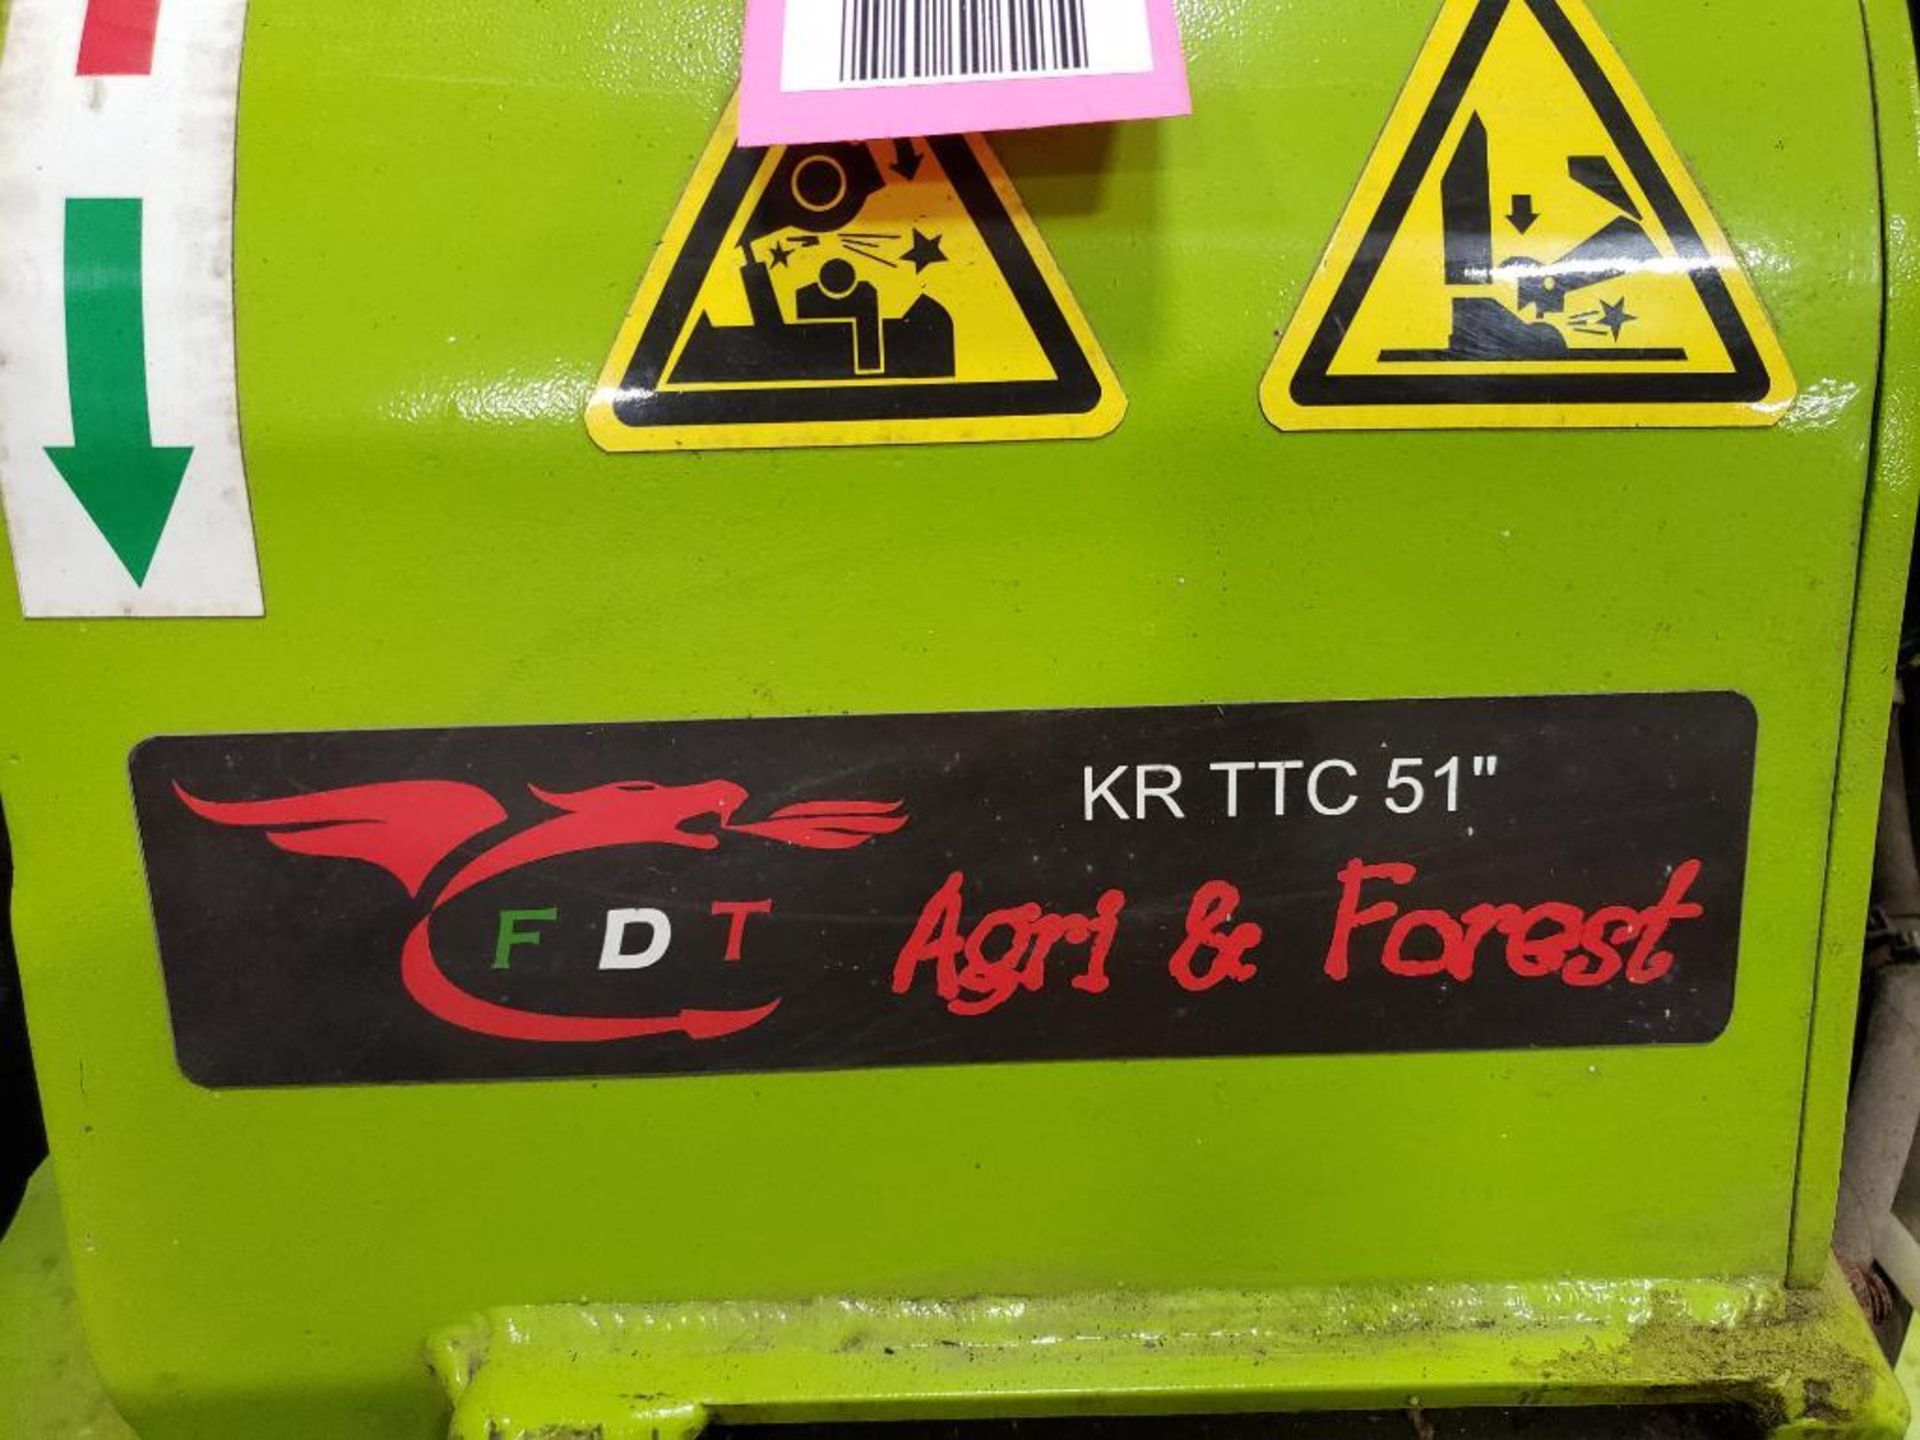 FDT Agri & Forest KC-TTC-51" large truck / forestry tire changer unit. - Image 2 of 20